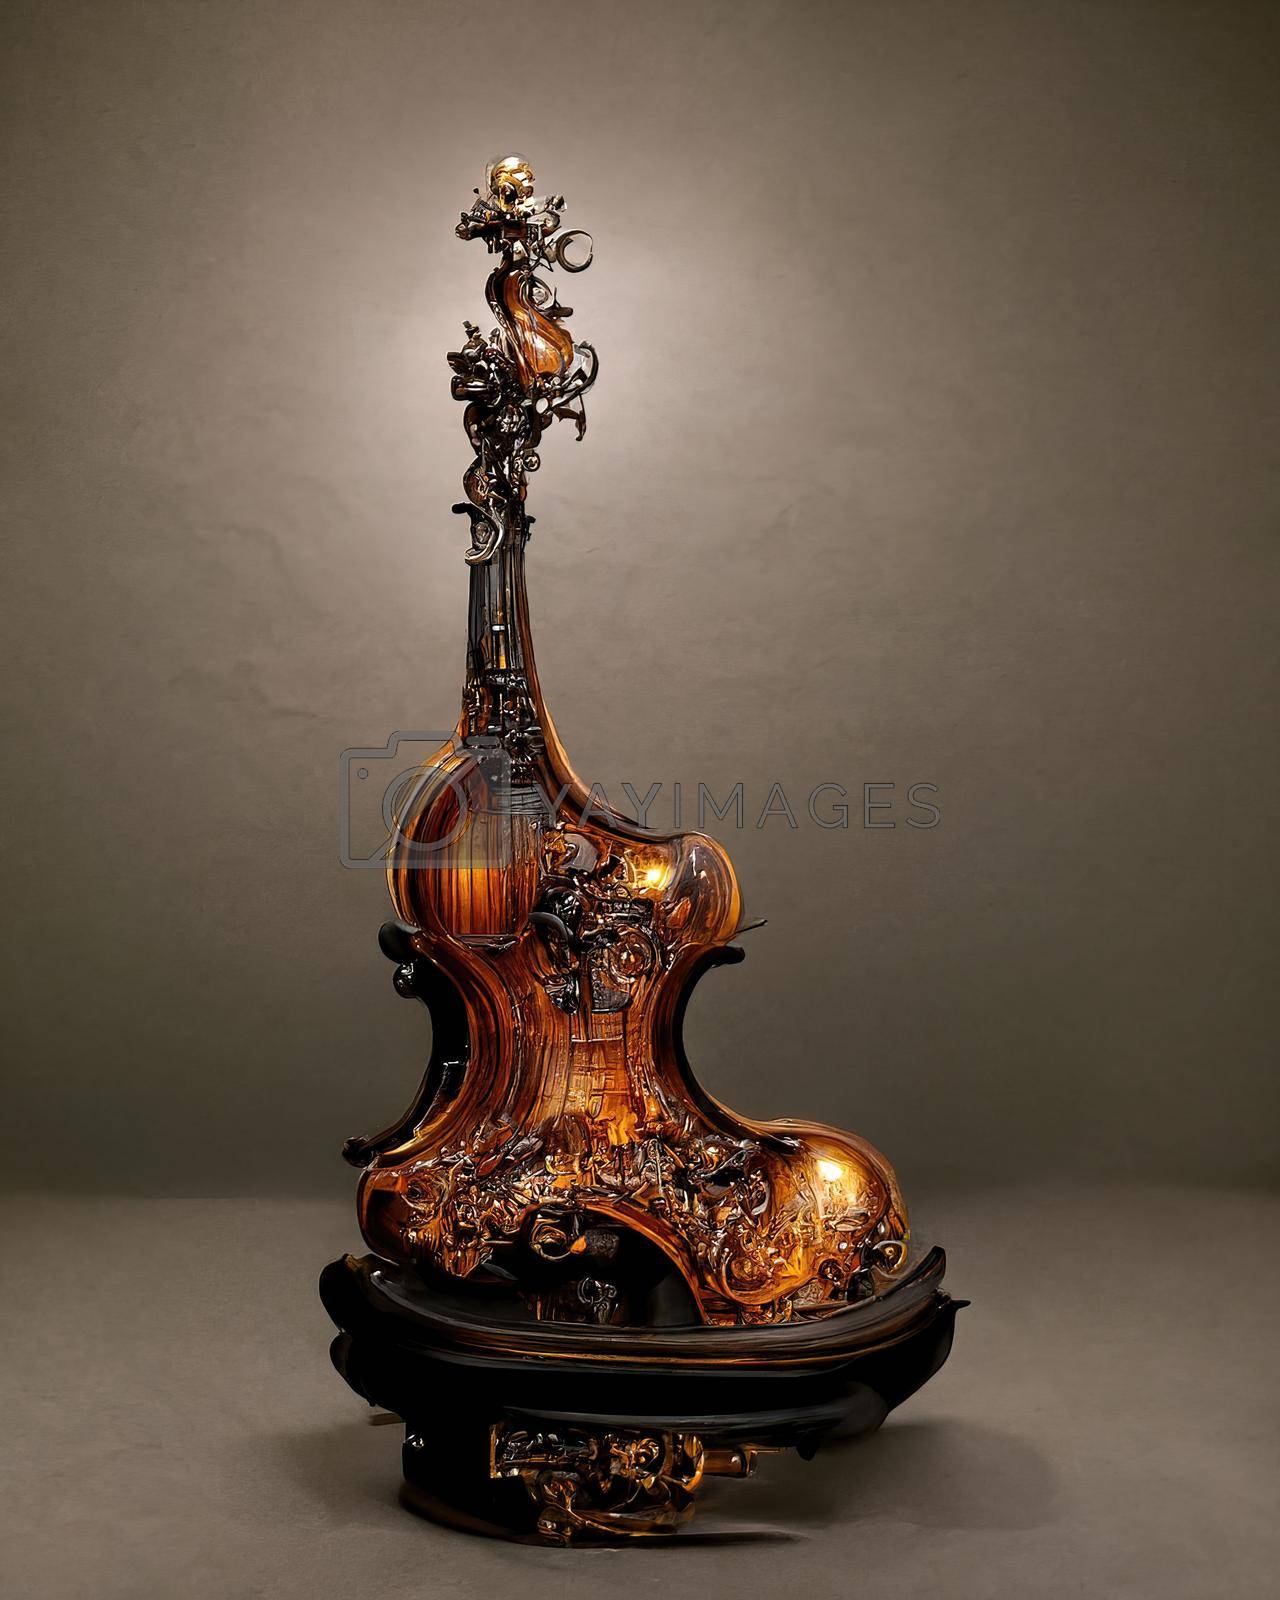 Royalty free image of Picture of baroque violin statue, 3D illustration by Farcas